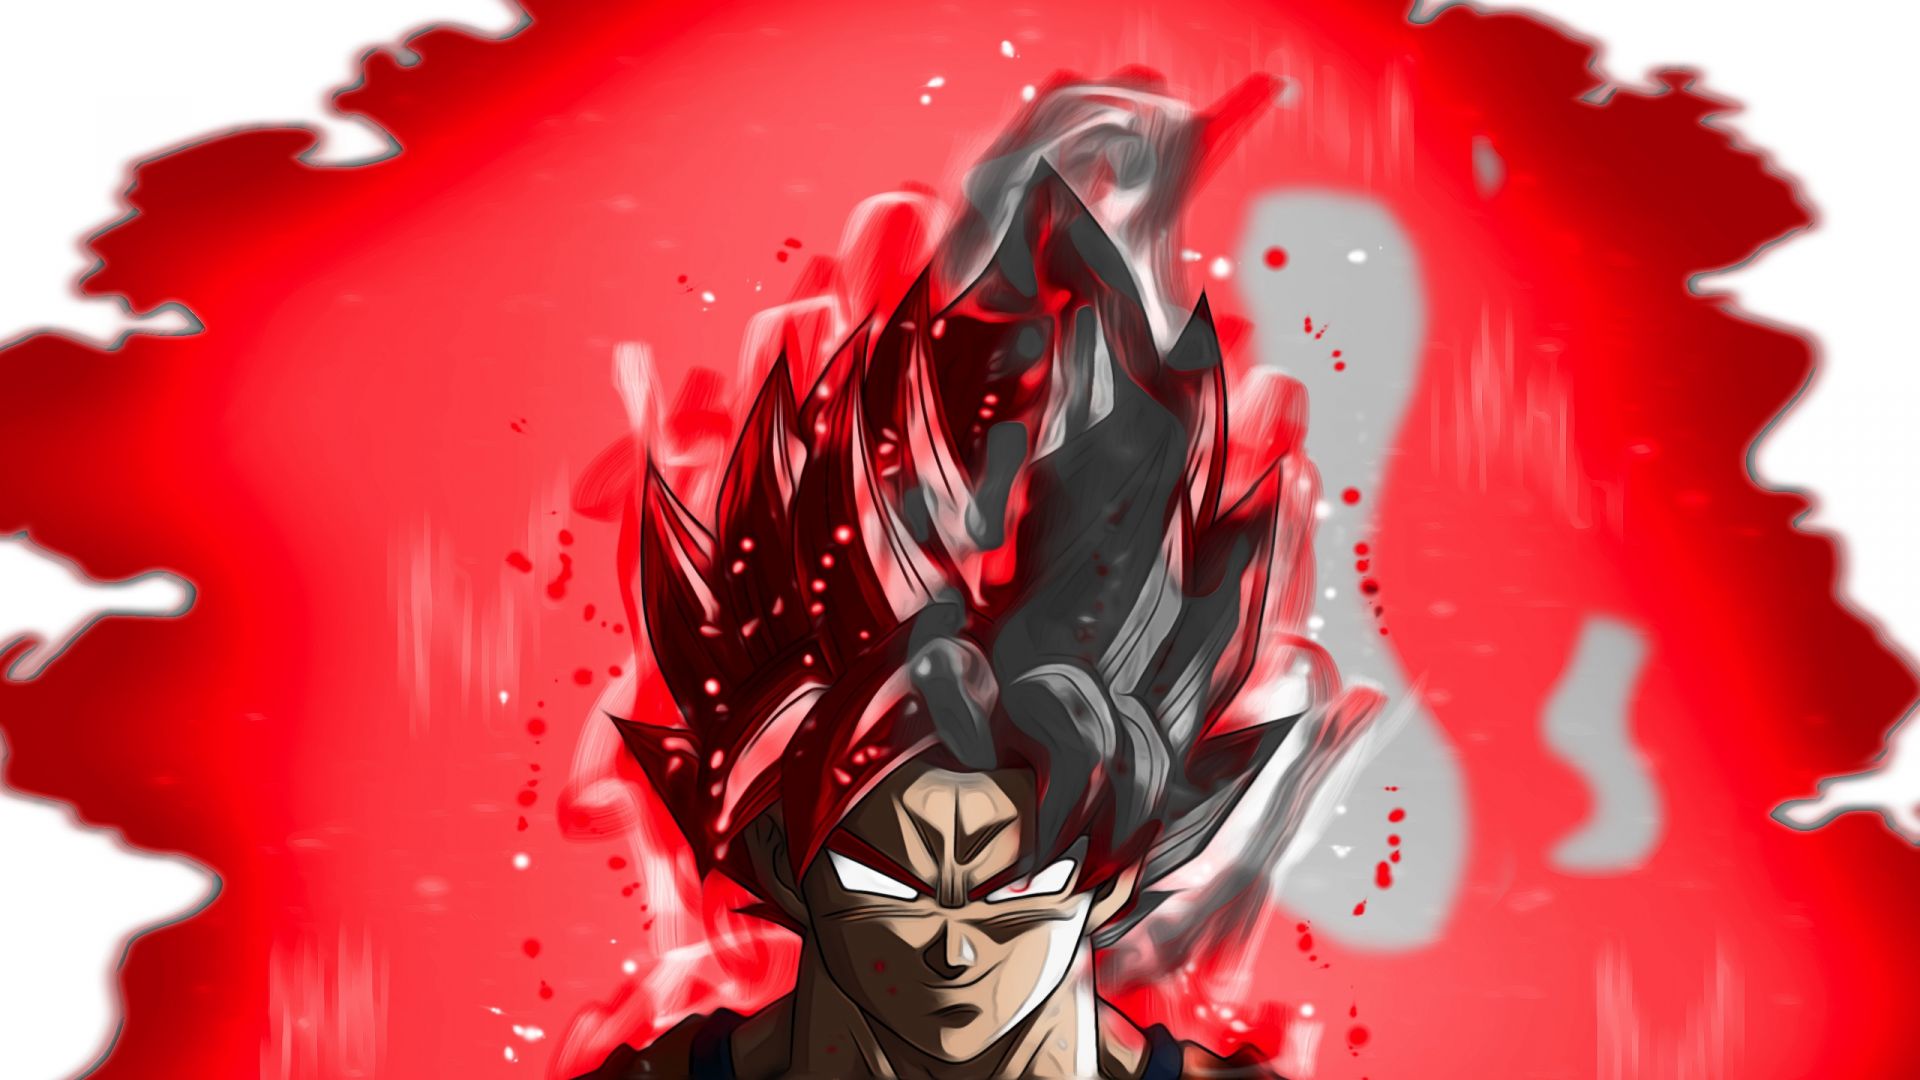 Goku Angry wallpaper by GoKuLoVeR1000  Download on ZEDGE  cf05